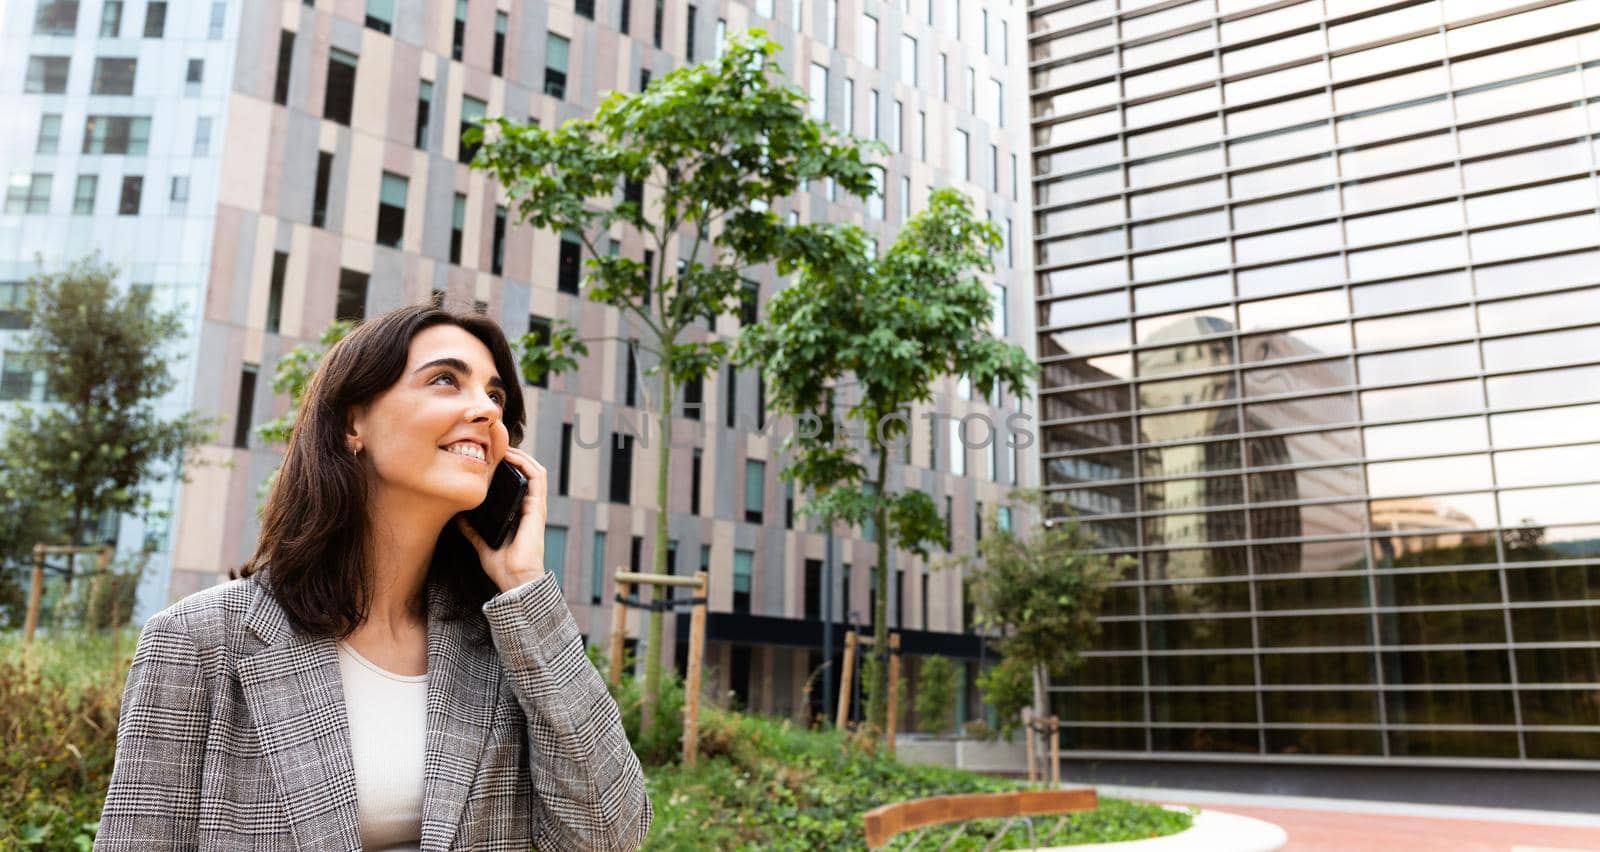 Panoramic image of smiling young business woman talking on cellphone next to office buildings. Copy space. by Hoverstock